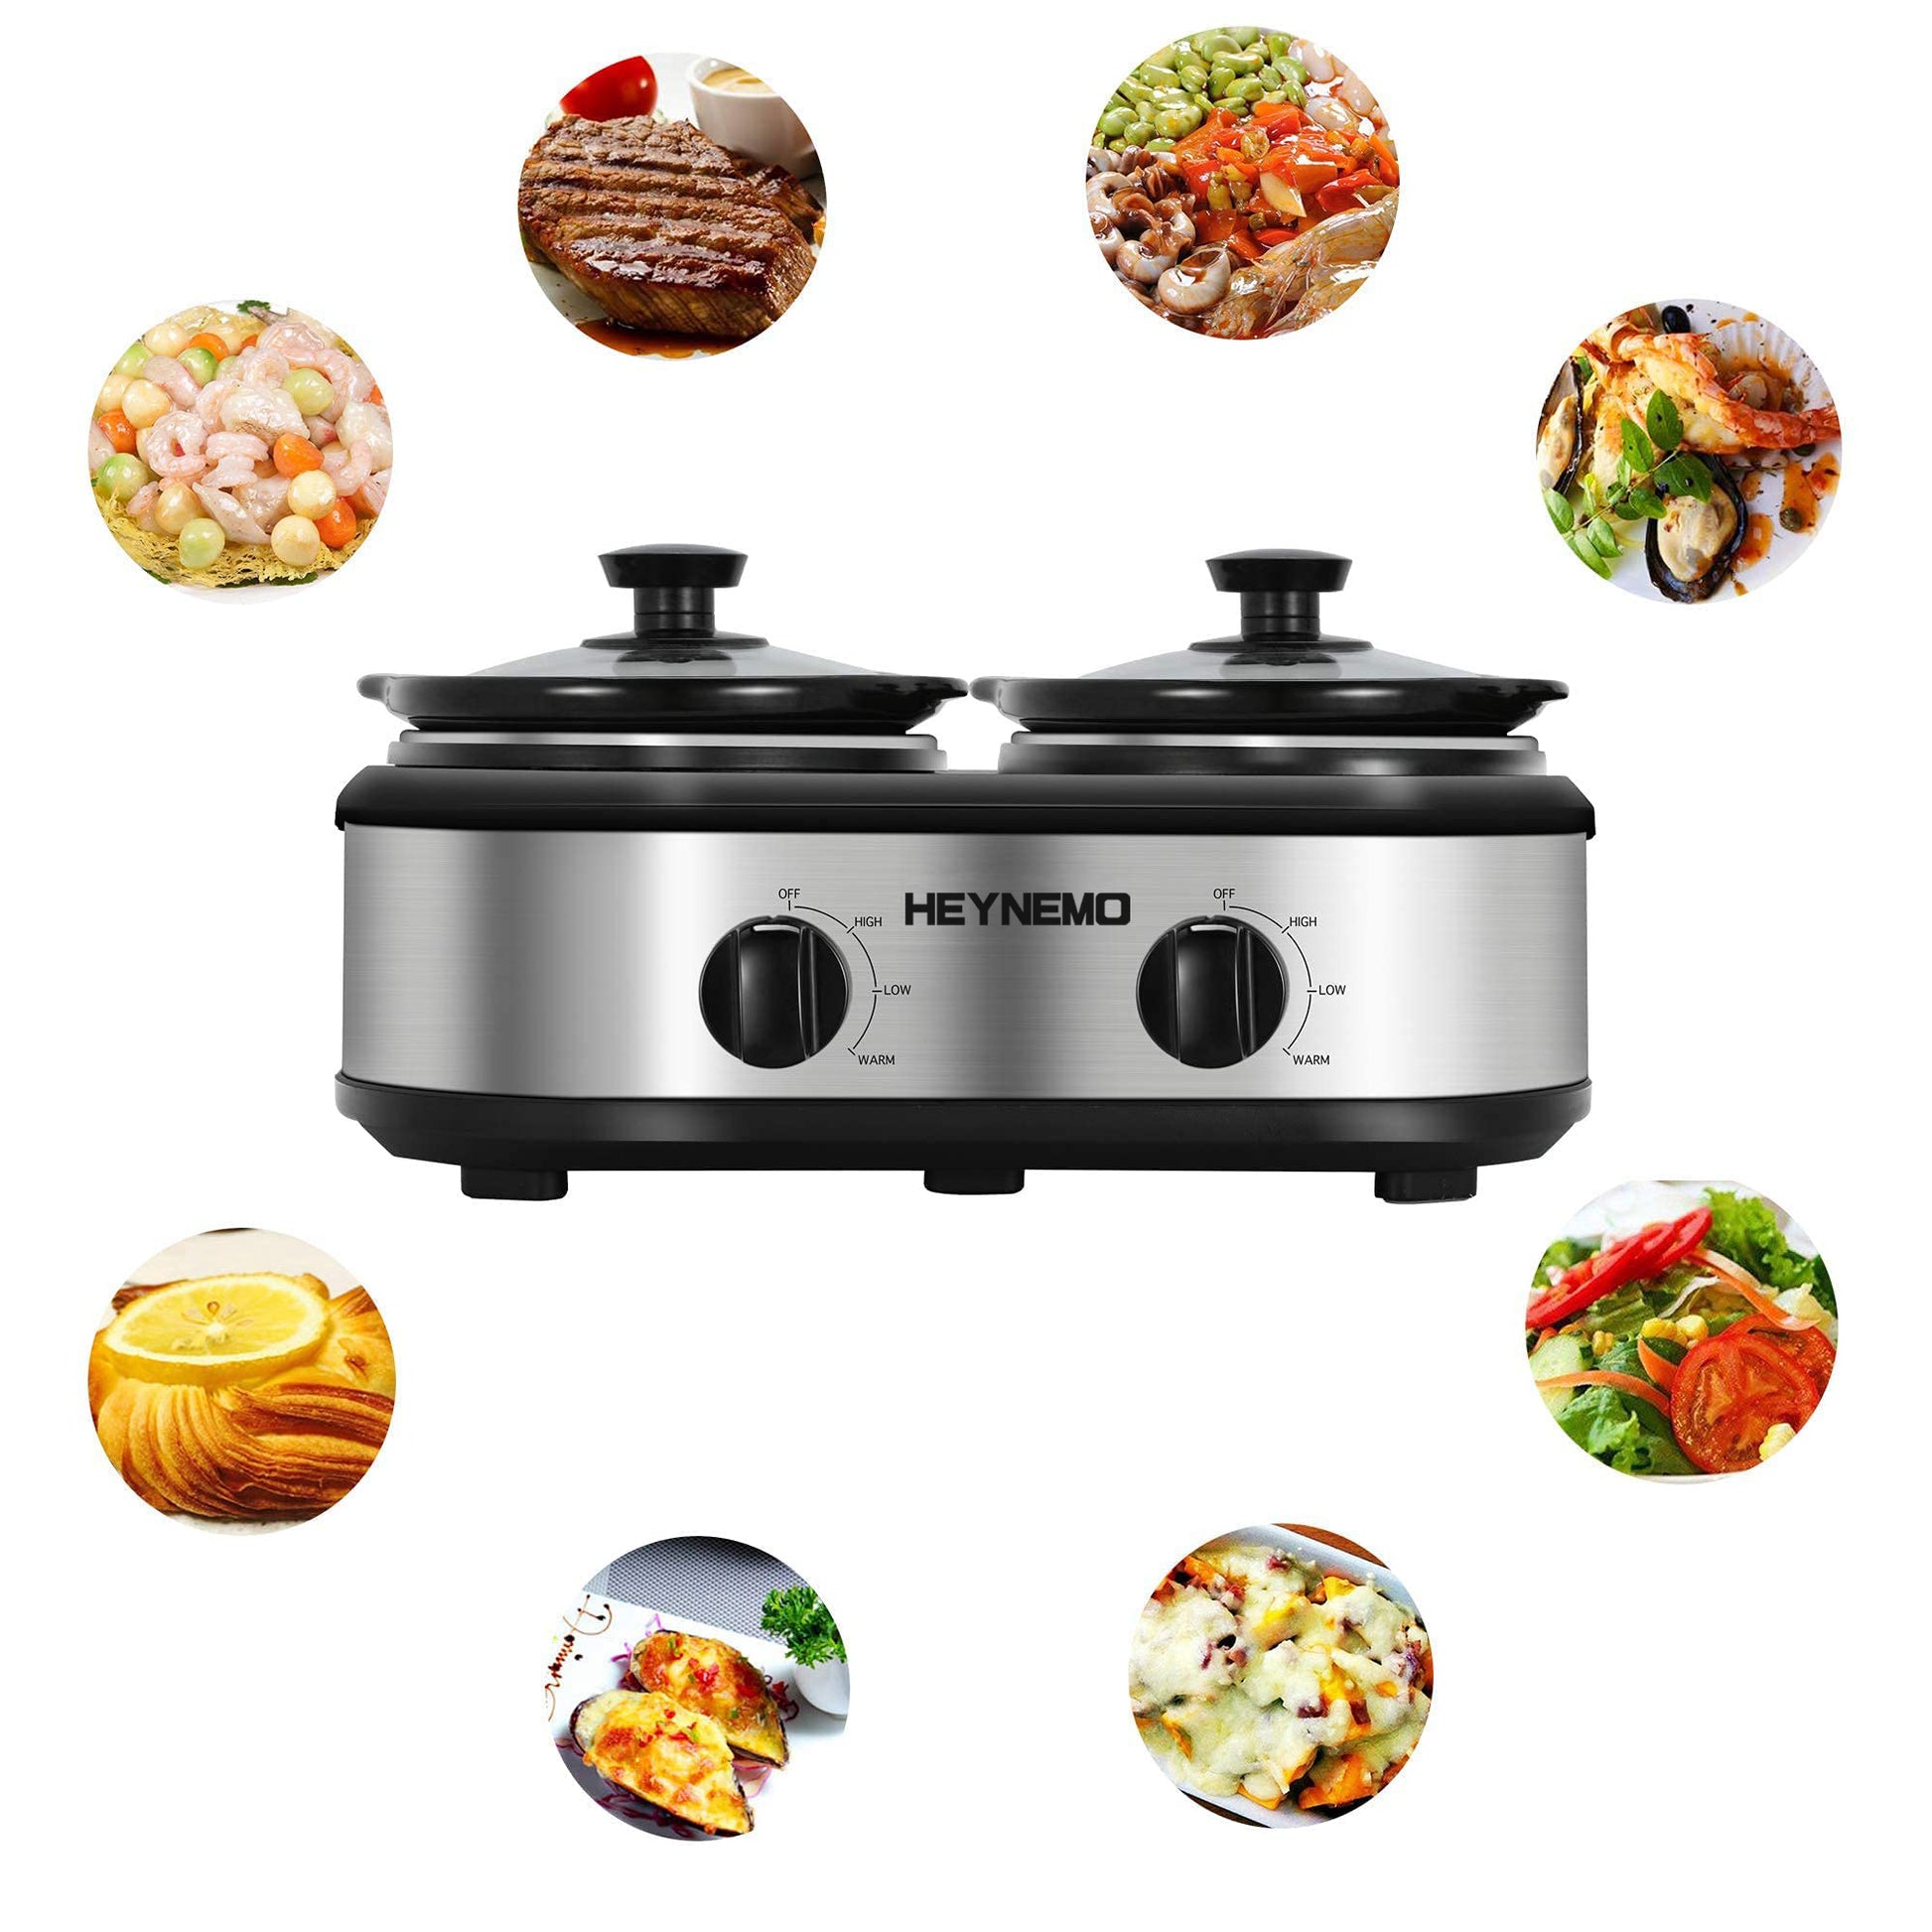 Specialty Slow Cookers & Food Warmers